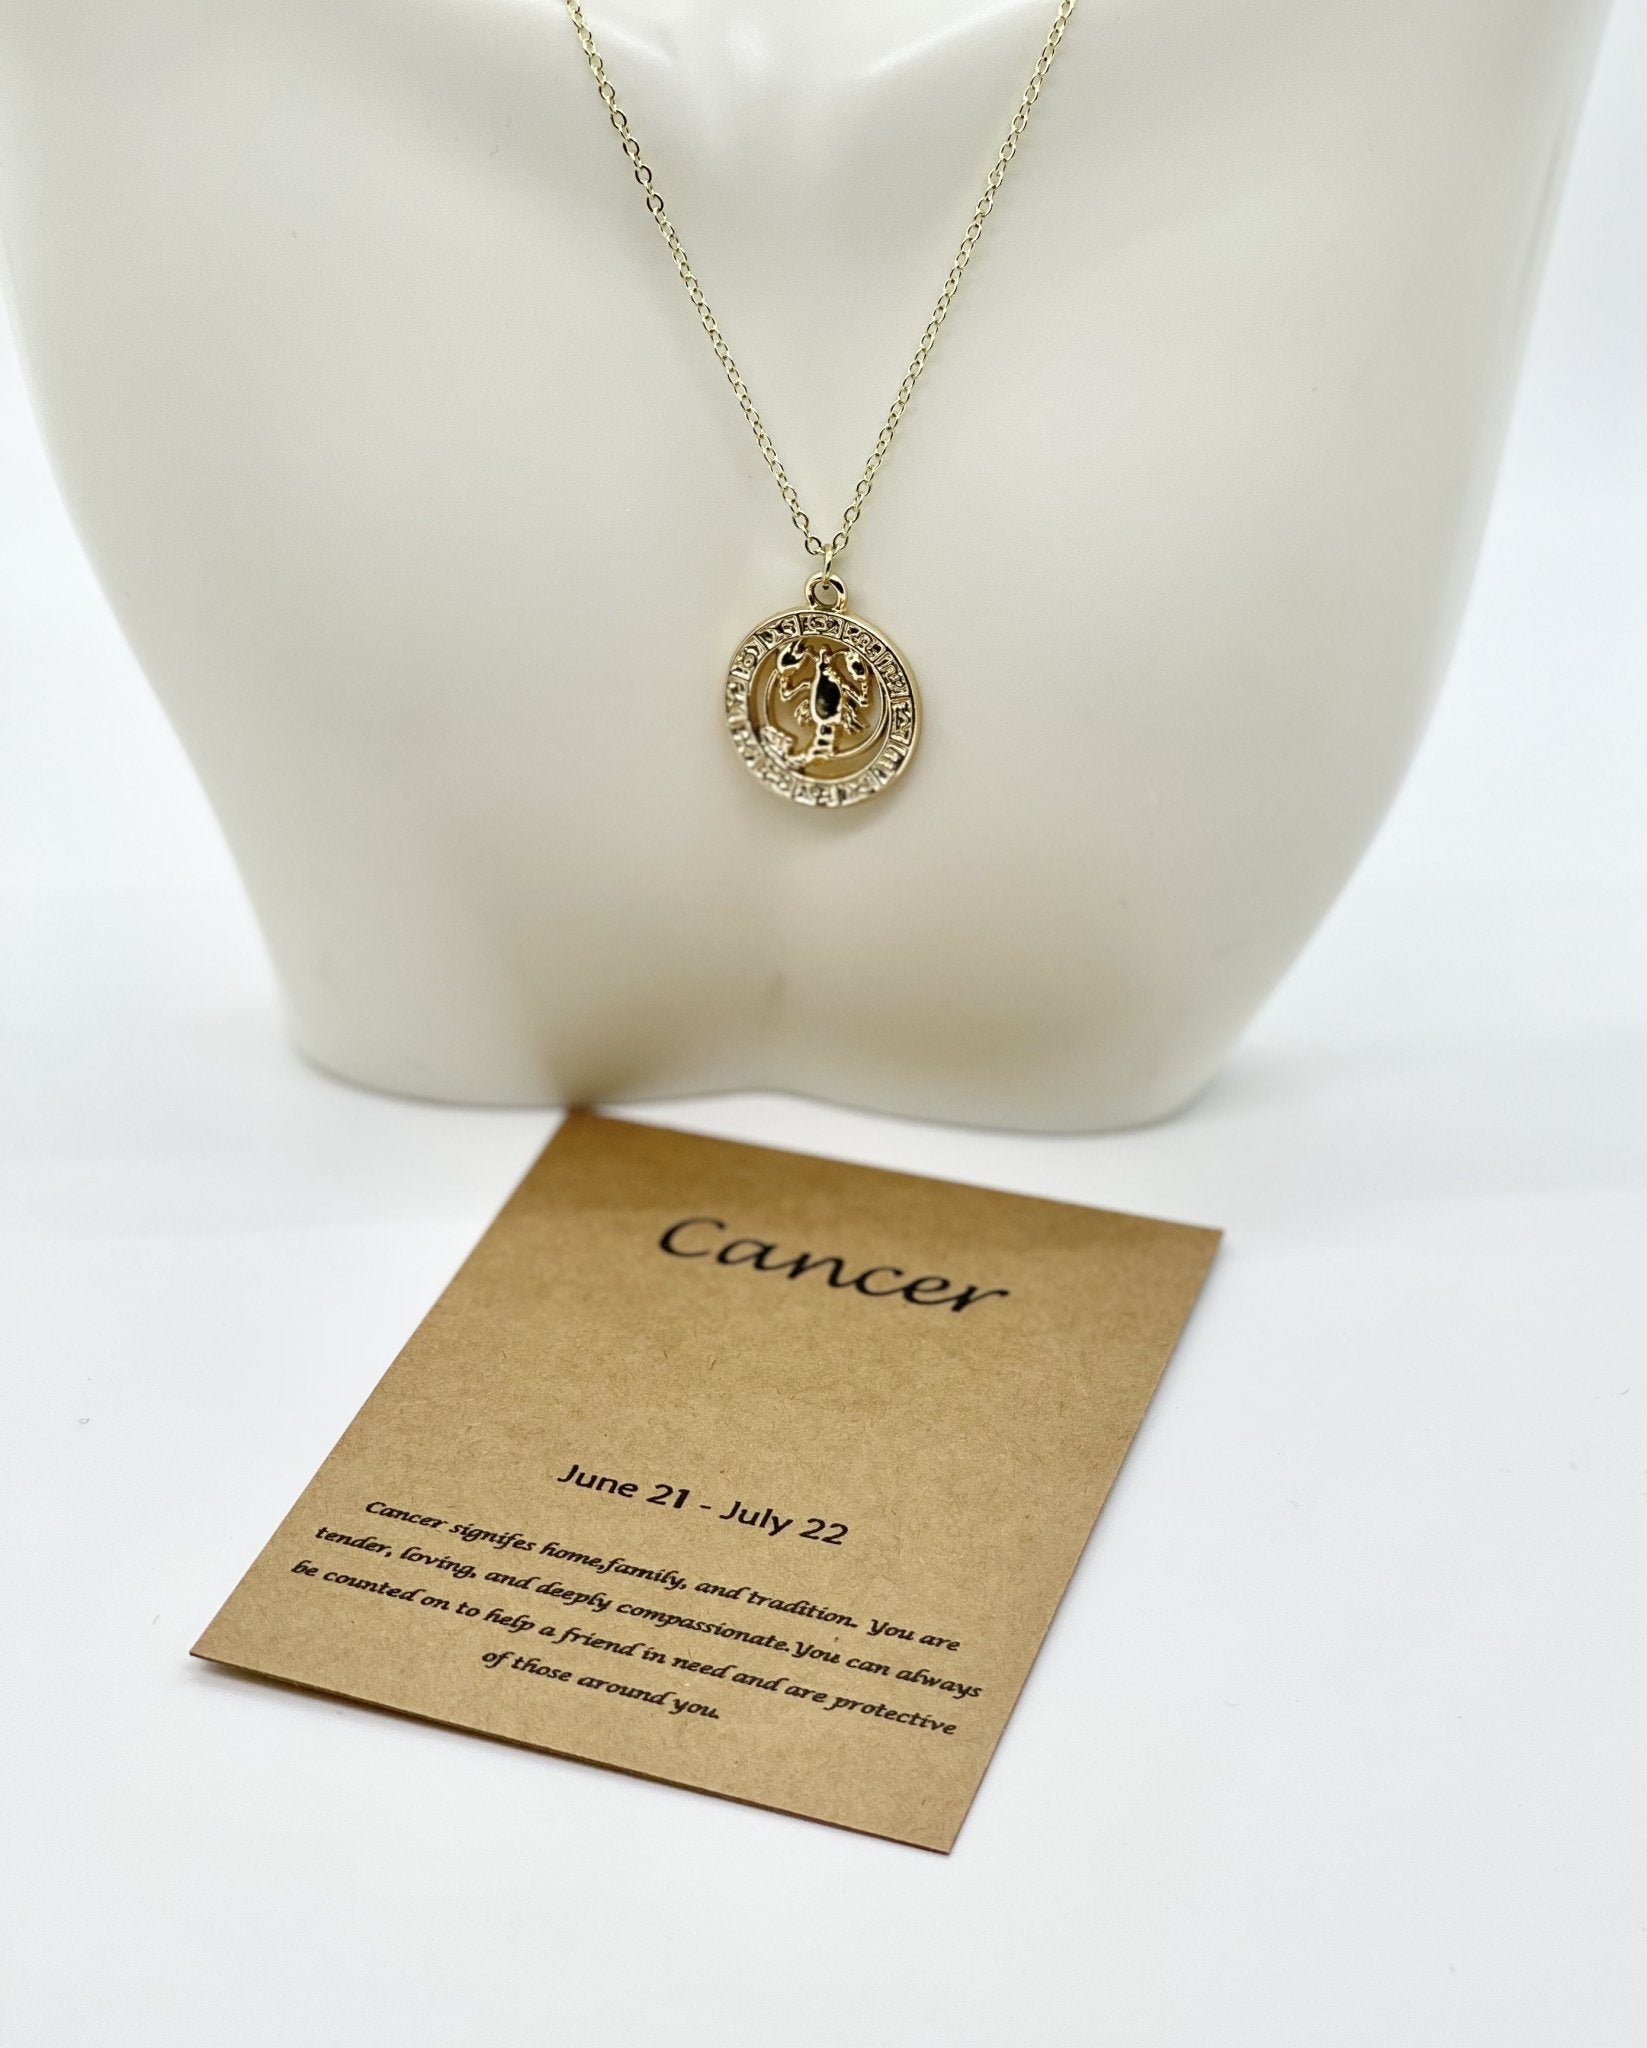 Brooke Gregson | Cancer 14k Gold Diamond Constellation Astrology Necklace  at Voiage Jewelry